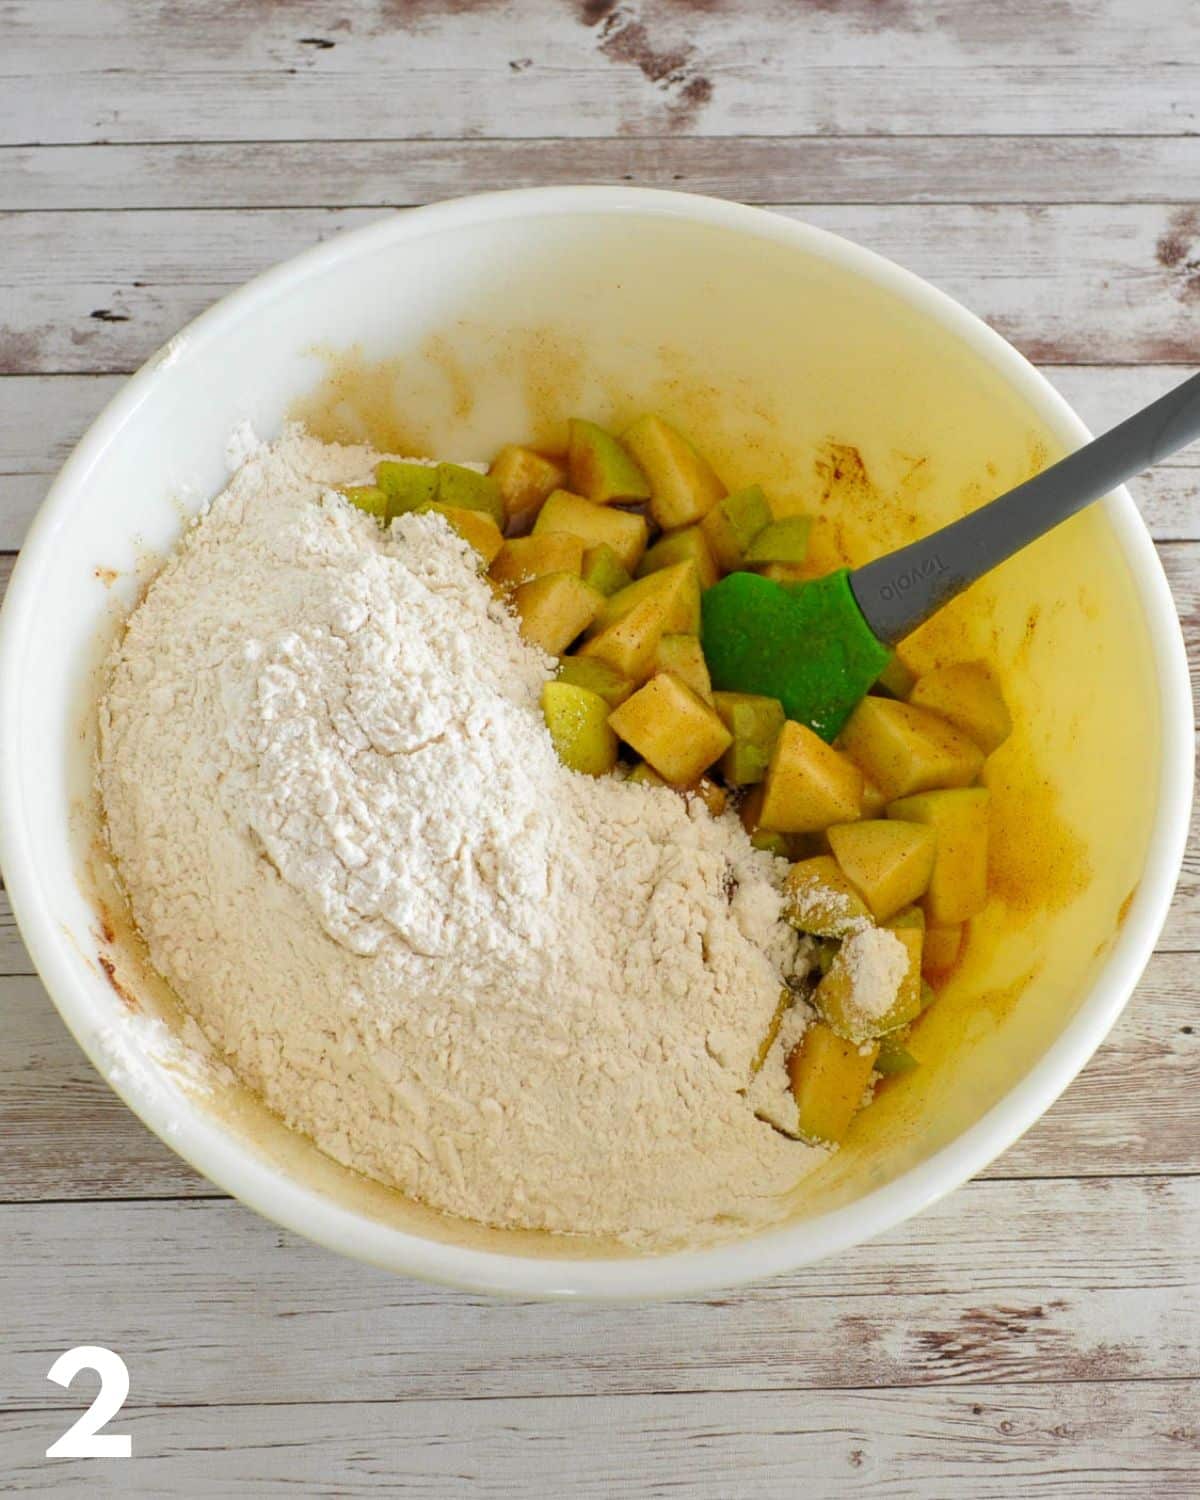 Flour and other dry ingredients added to cubed apples in a large mixing bowl. 